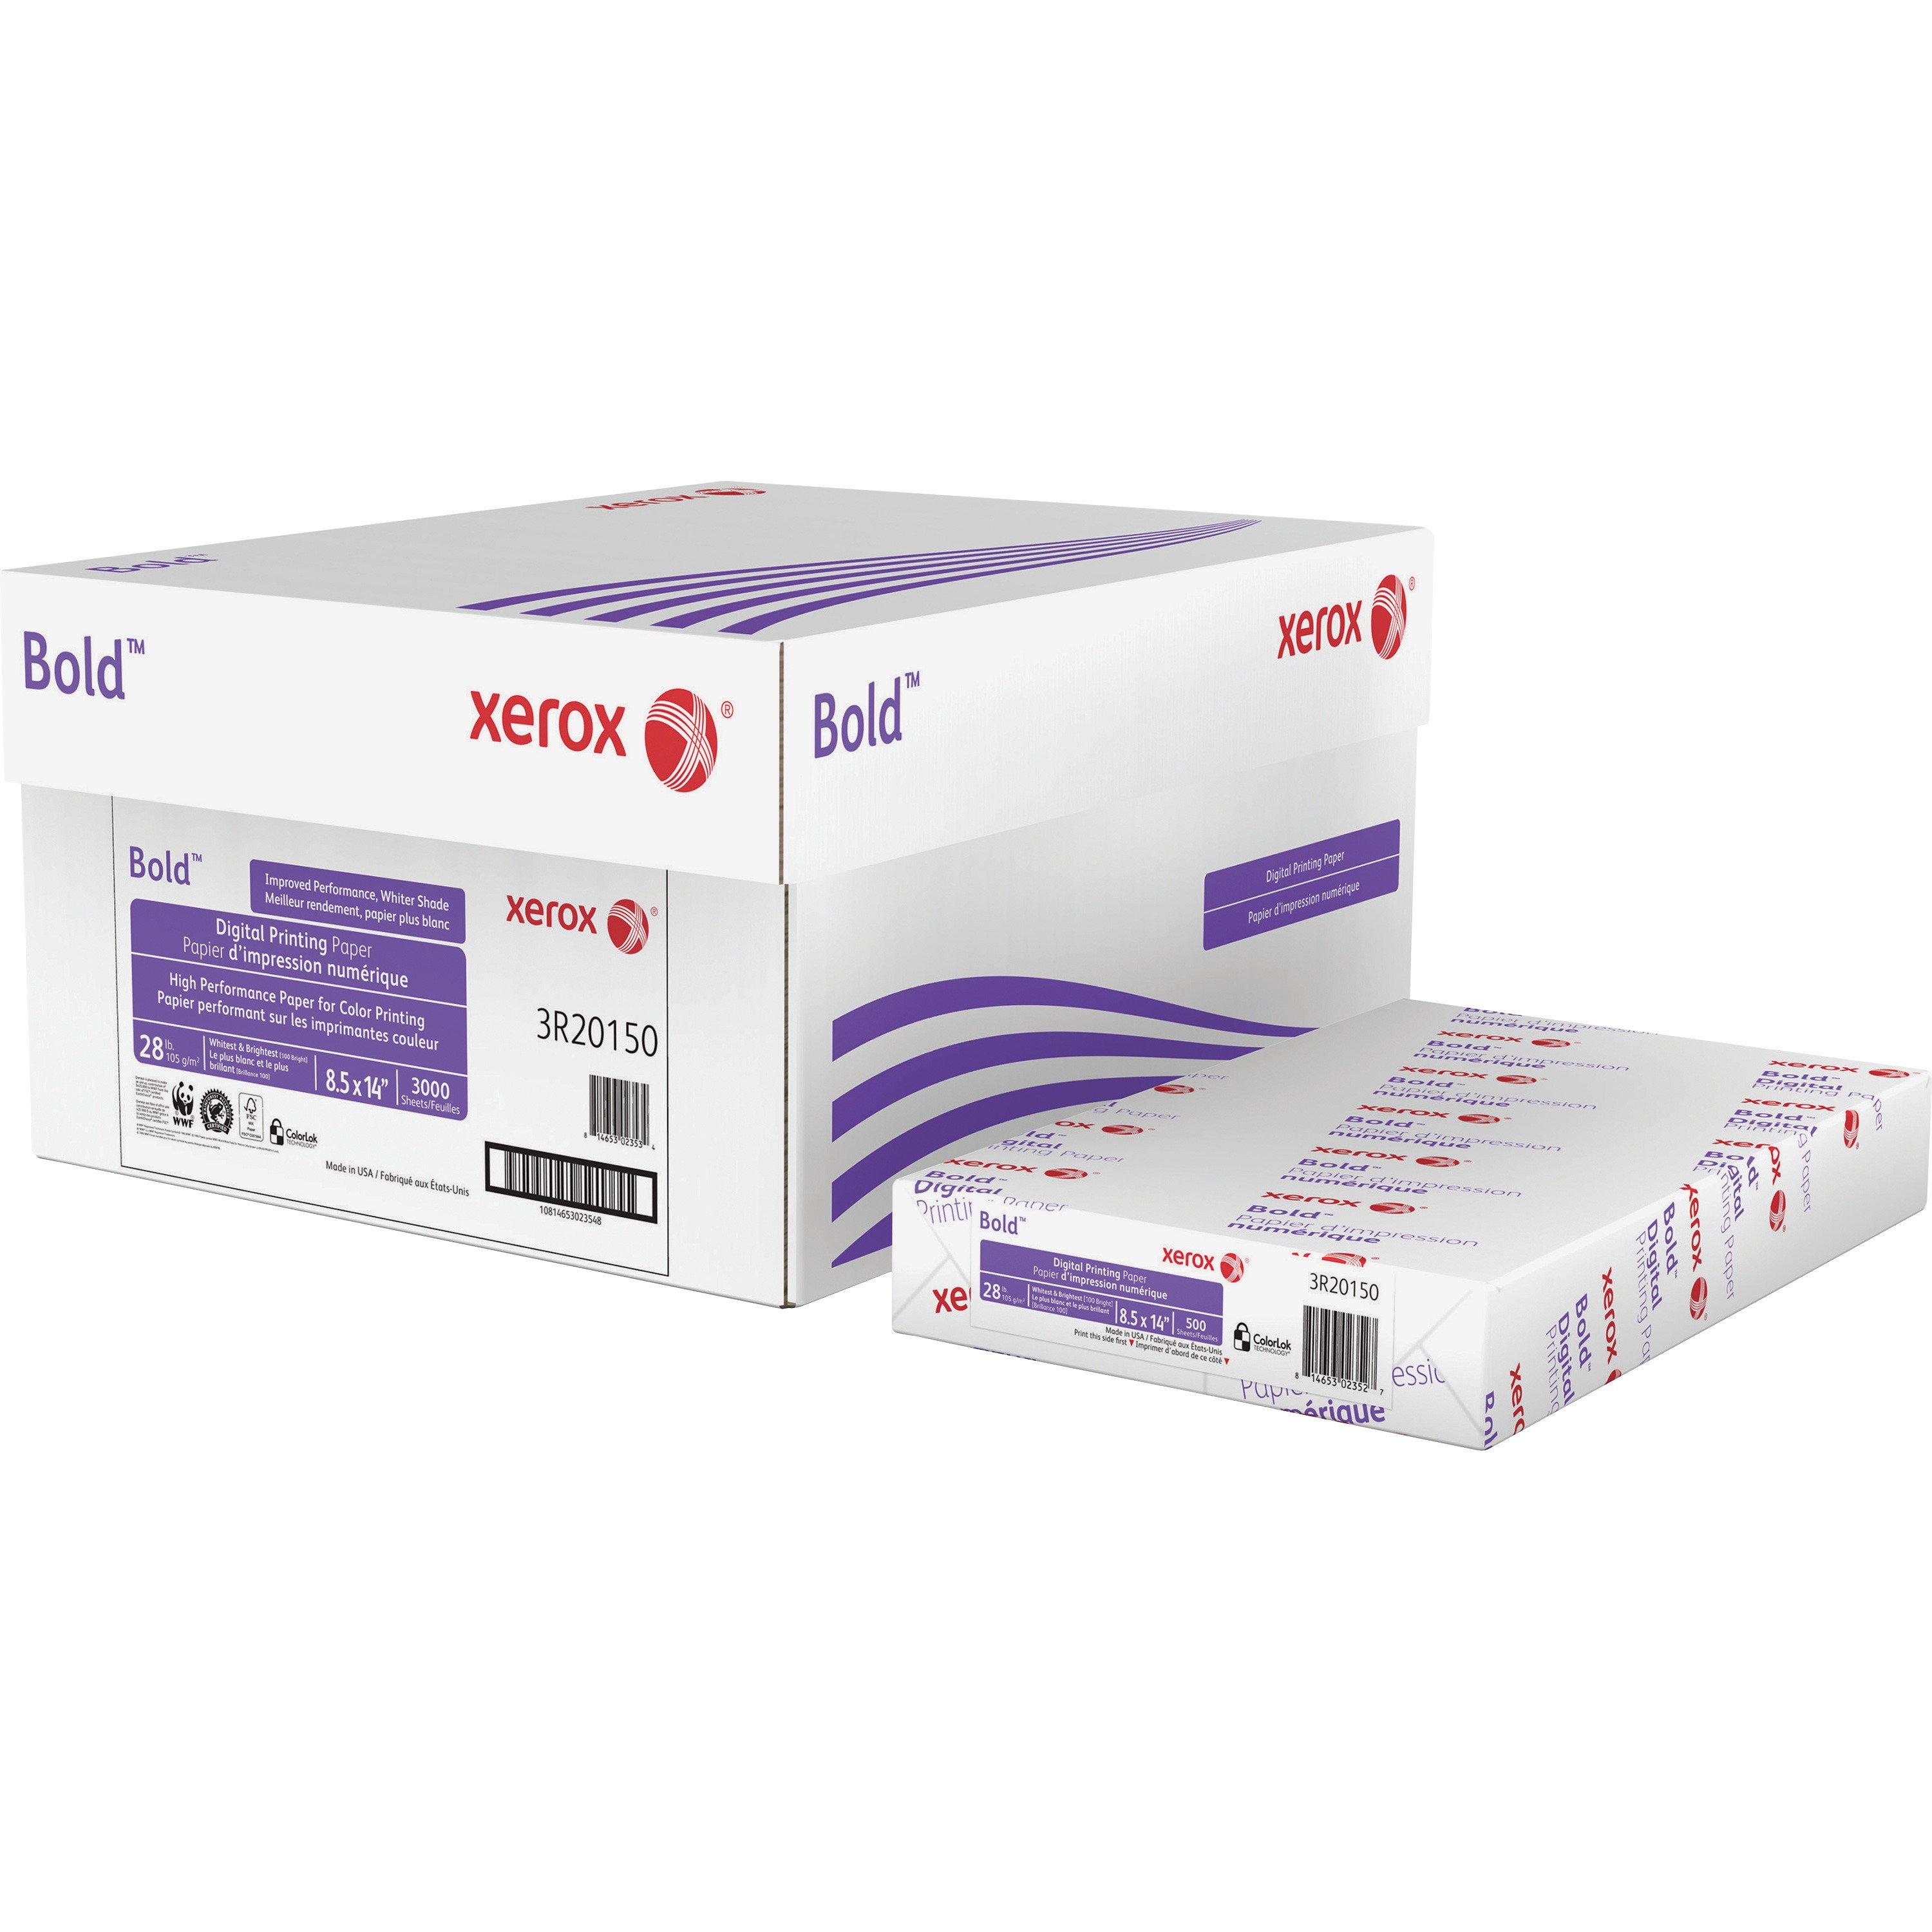 Xerox Bold White 28 lb. Smooth Digital Printing Paper 8.5x11 in.